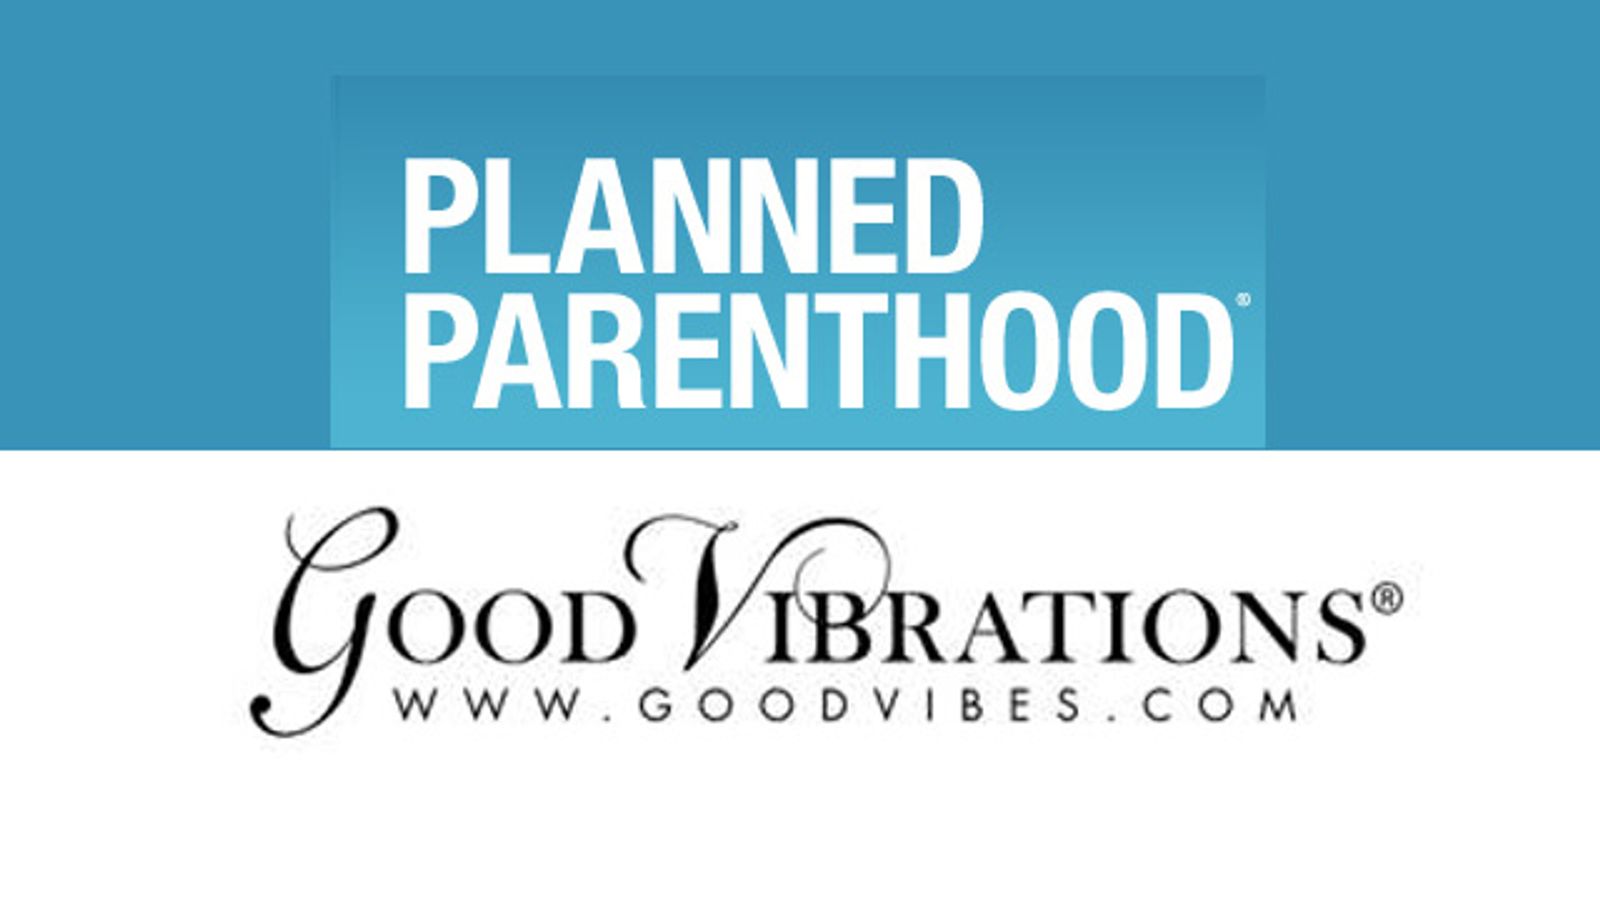 Good Vibes Partners With Planned Parenthood